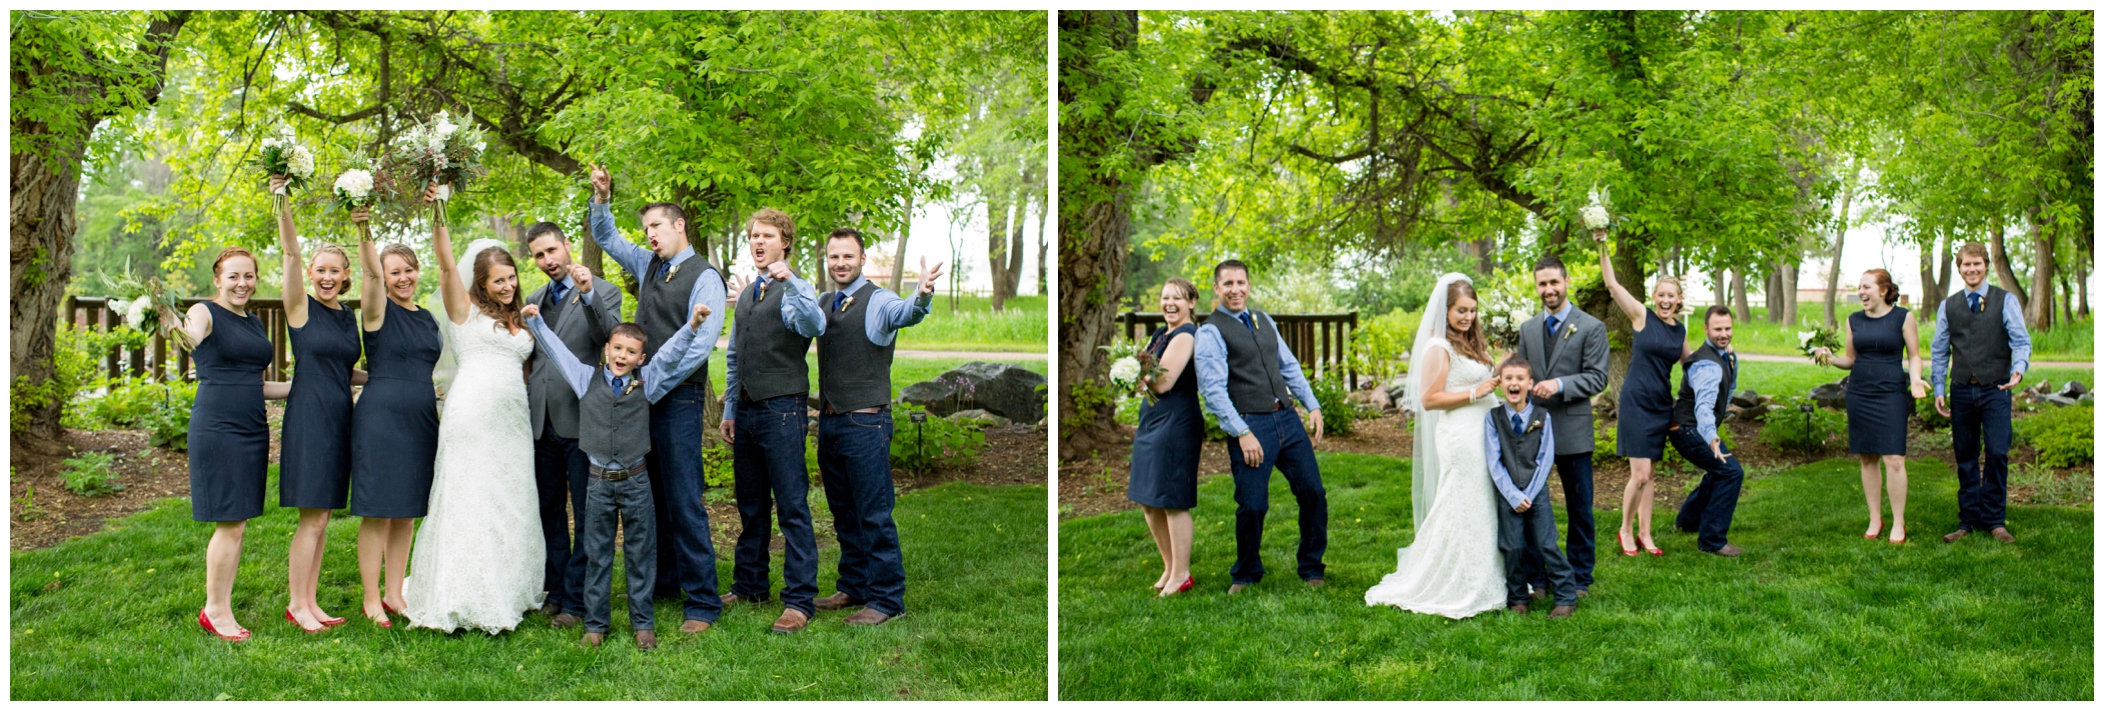 picture of groomsmen in jeans and vests